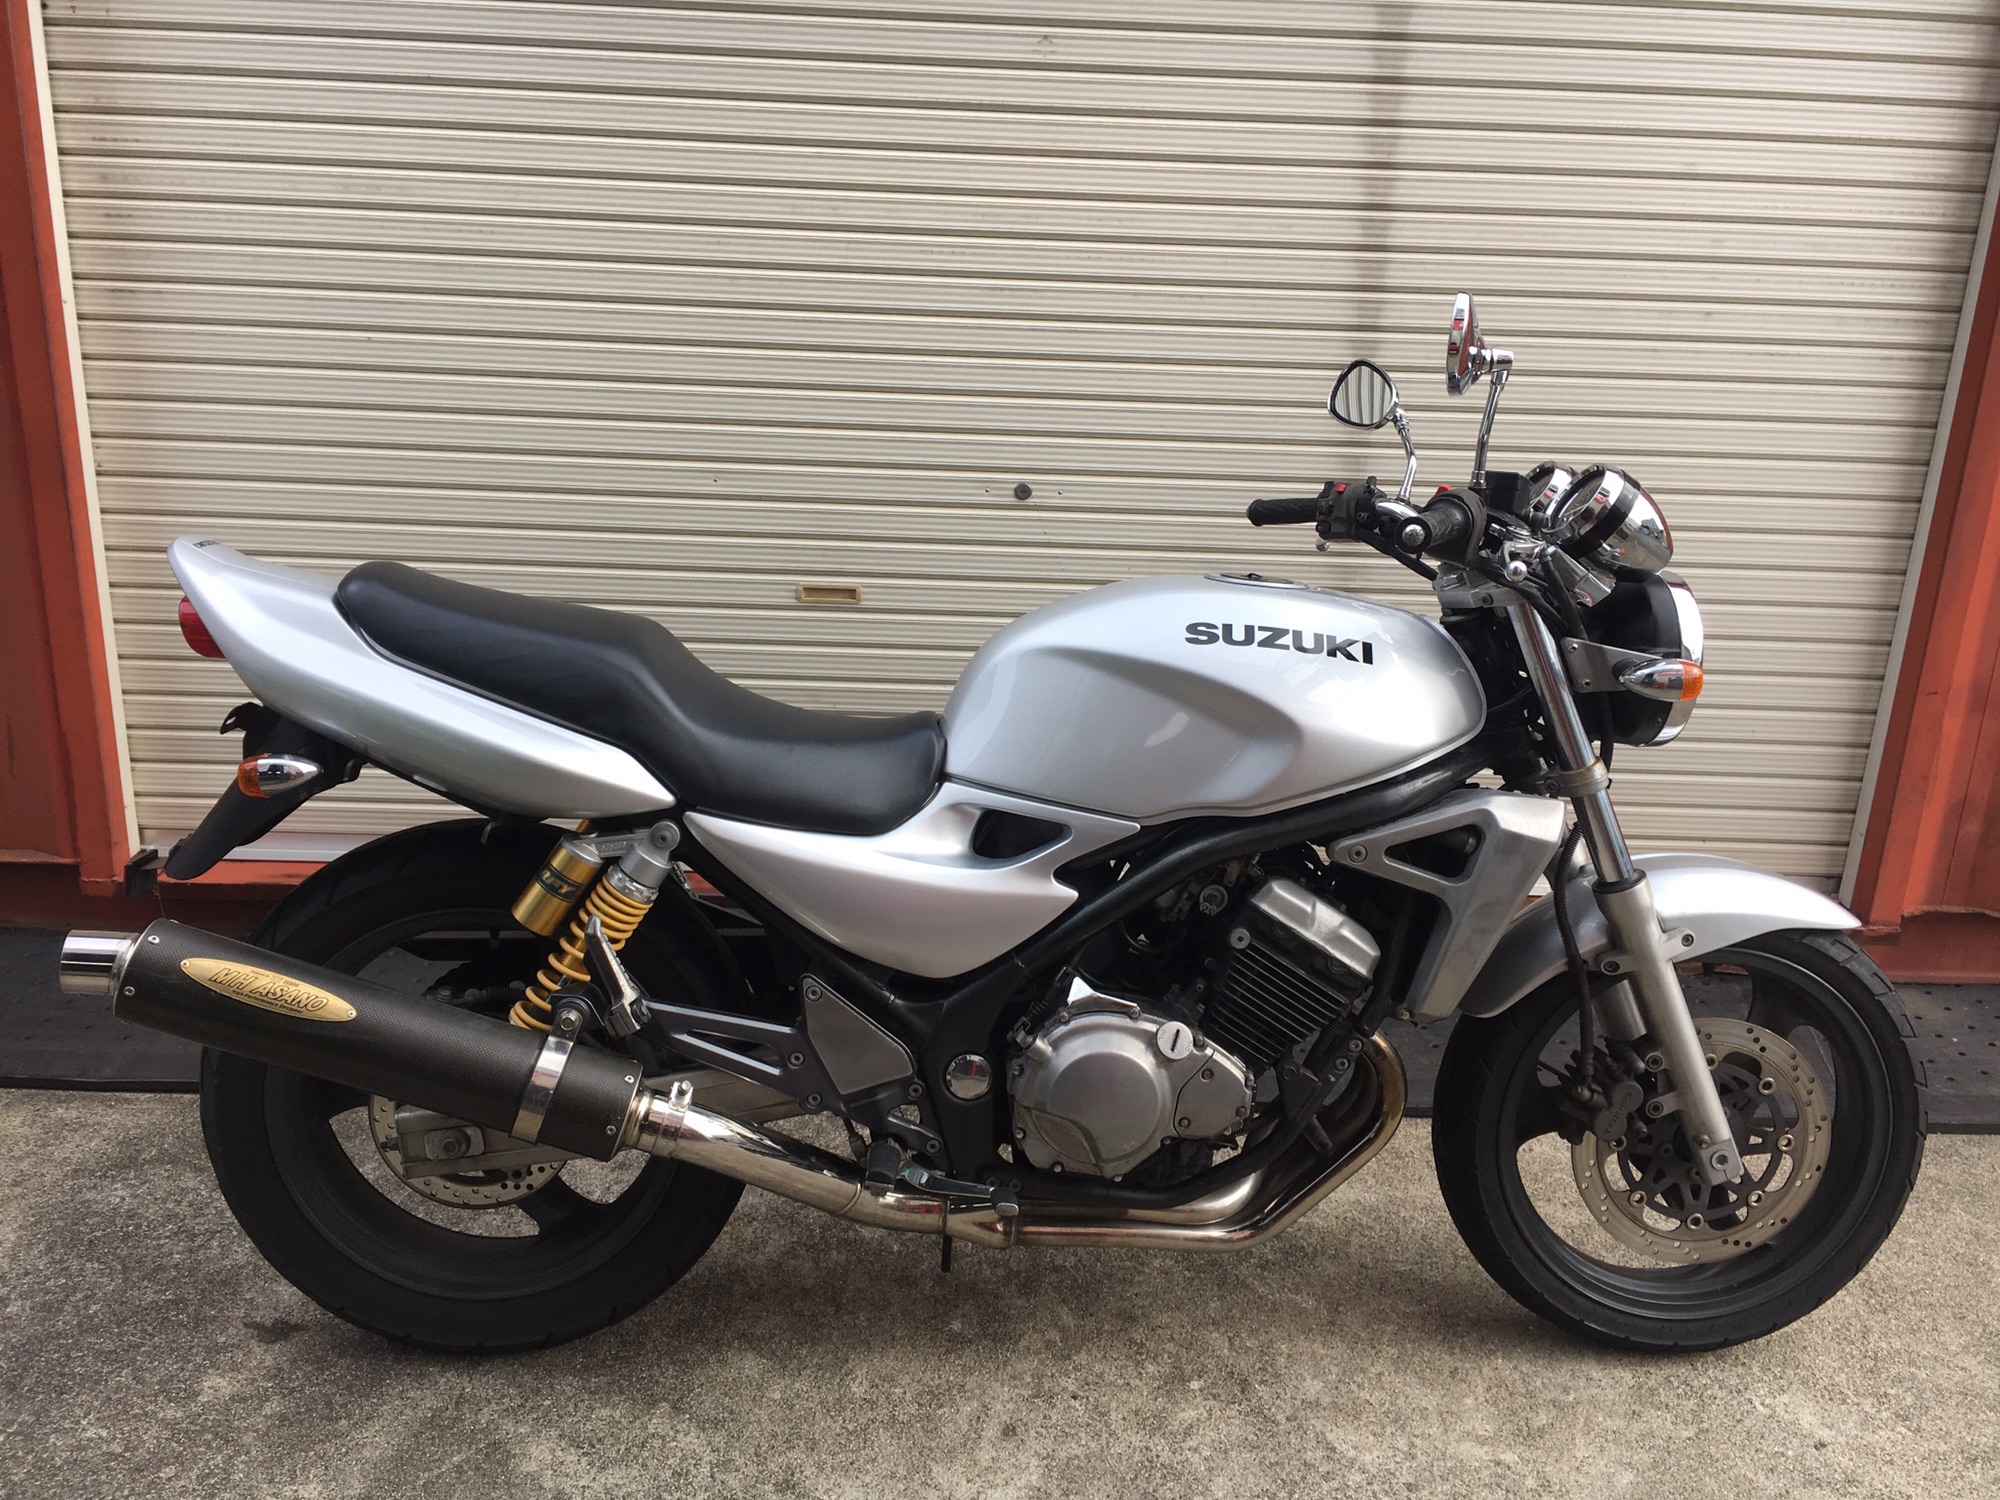 GSX250FX (バリオスII) MH ASANO マフラー SOLD OUT 30.8万円